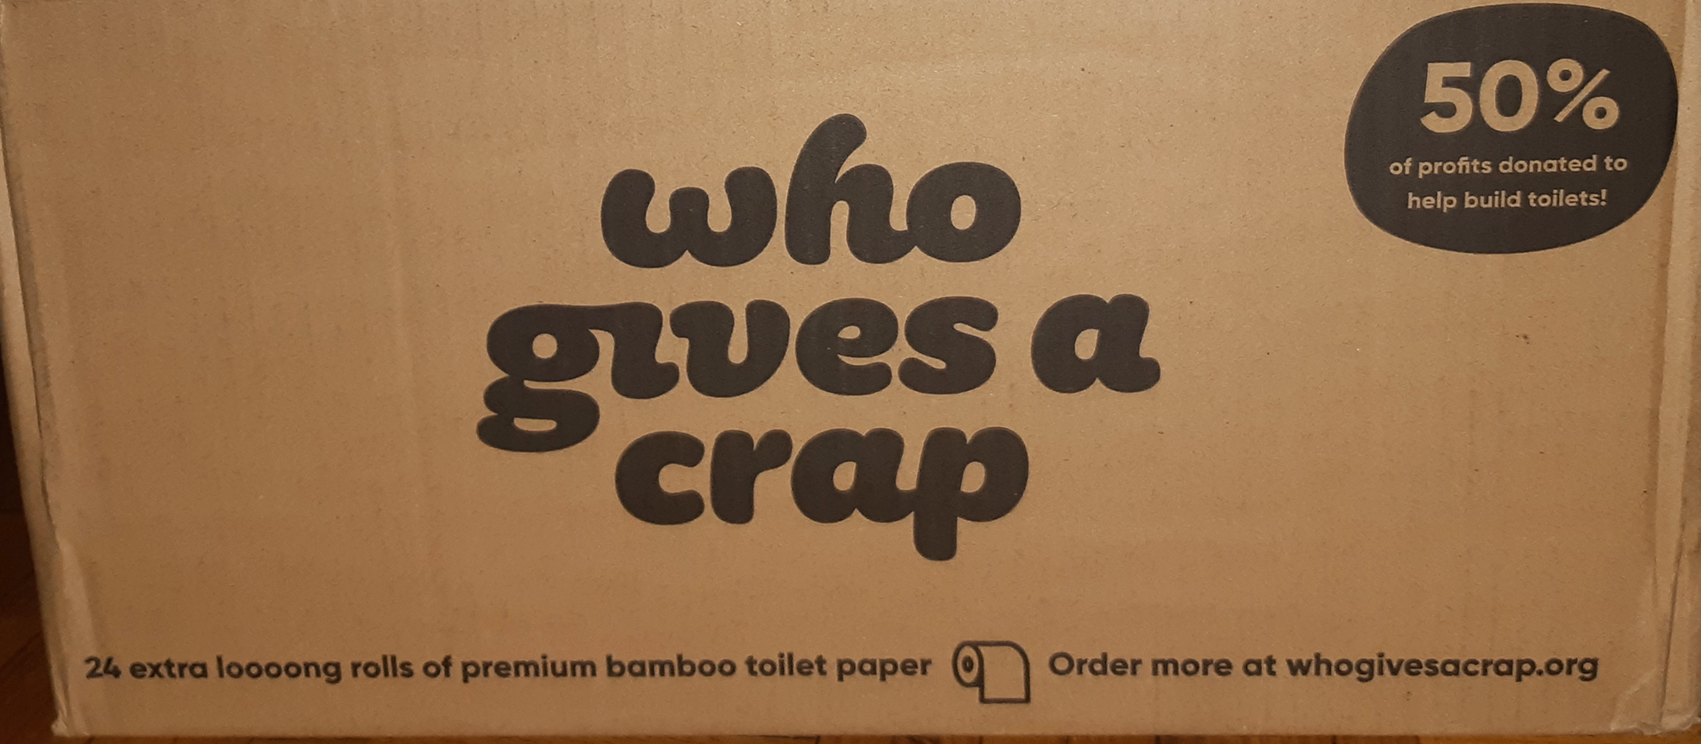 AterImber.com - No. Mad. - Switching to a Zero Waste Toilet Paper (Who Gives a Crap Review) - Who Gives a Crap Box - toielt paper, product review, zero waste, sustainability, paperless, blogger, reviewer